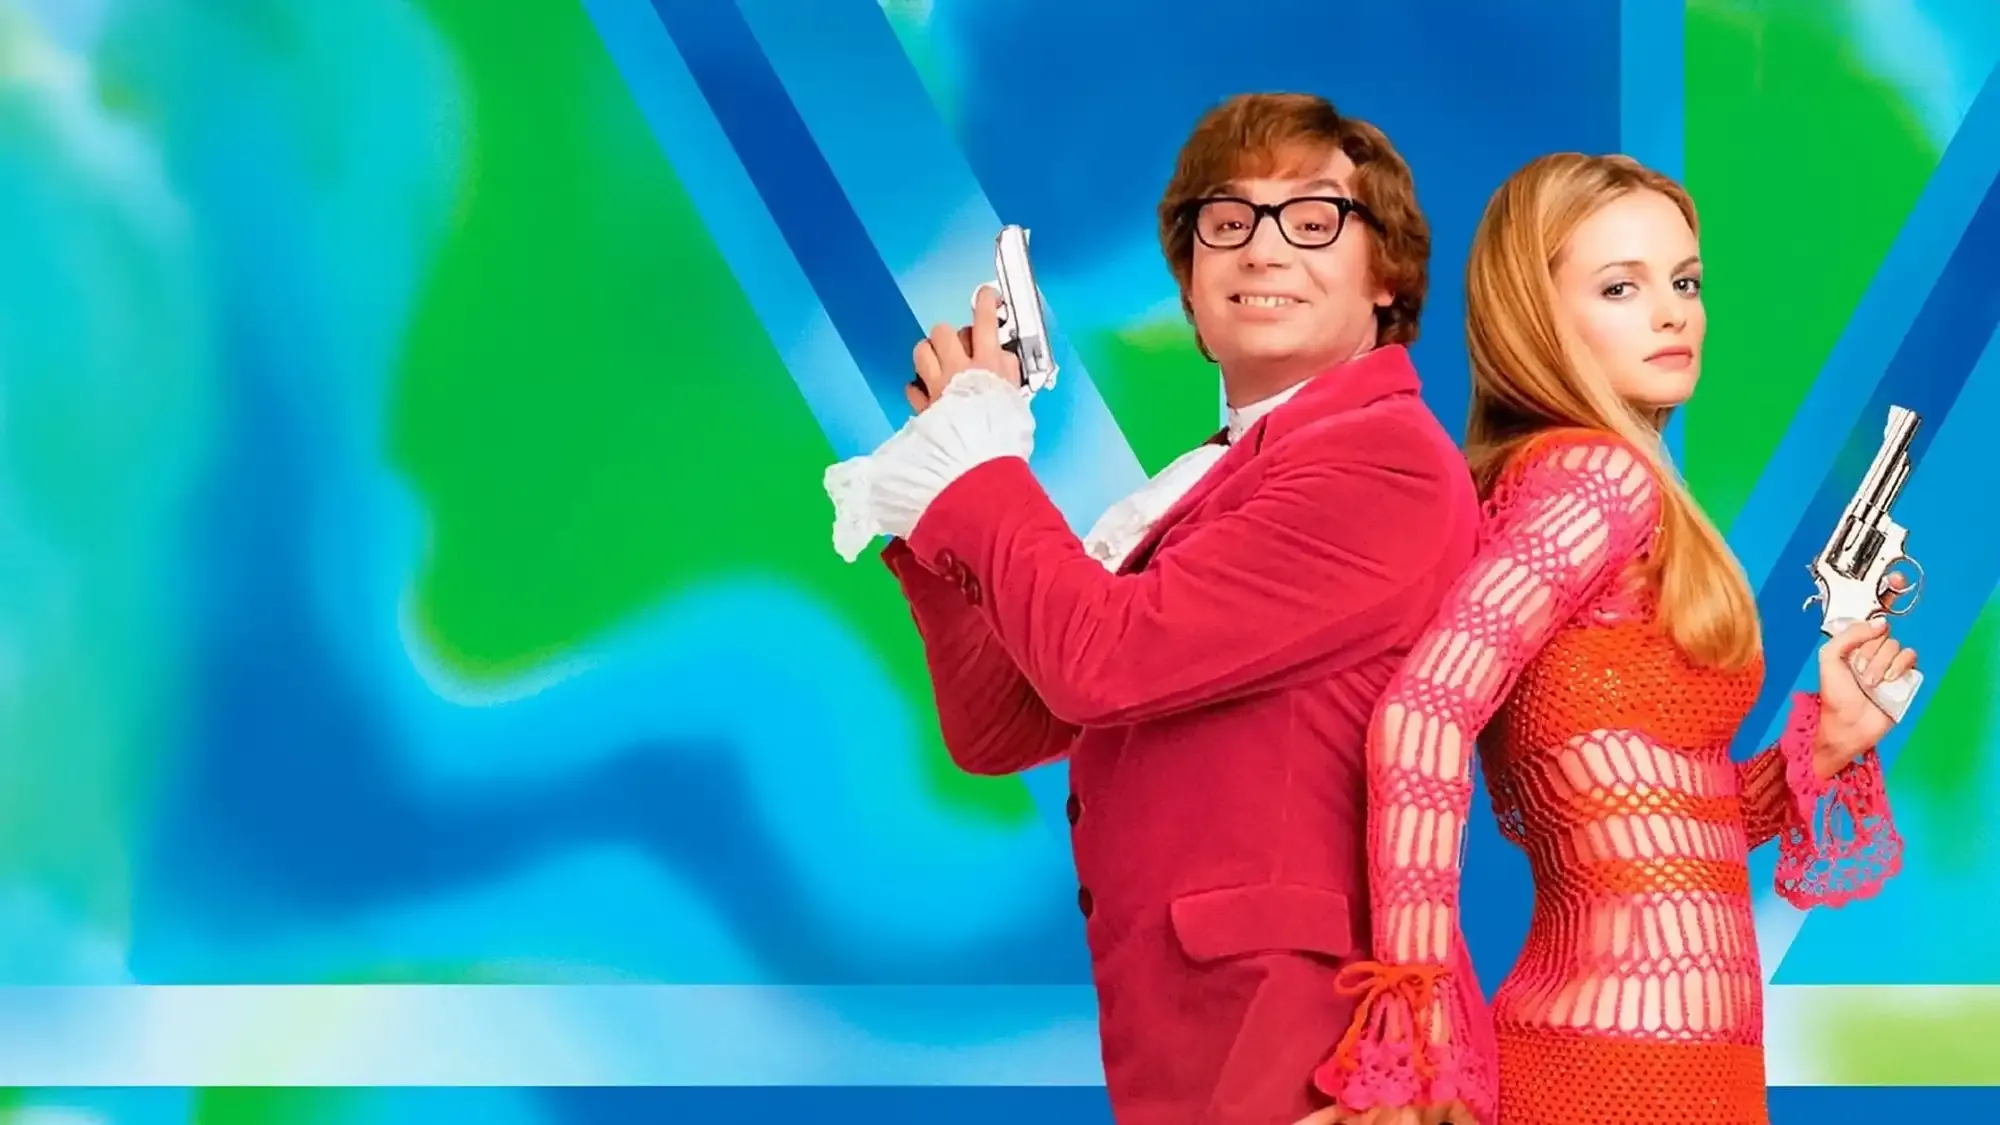 Austin Powers: The Spy Who Shagged Me movie review